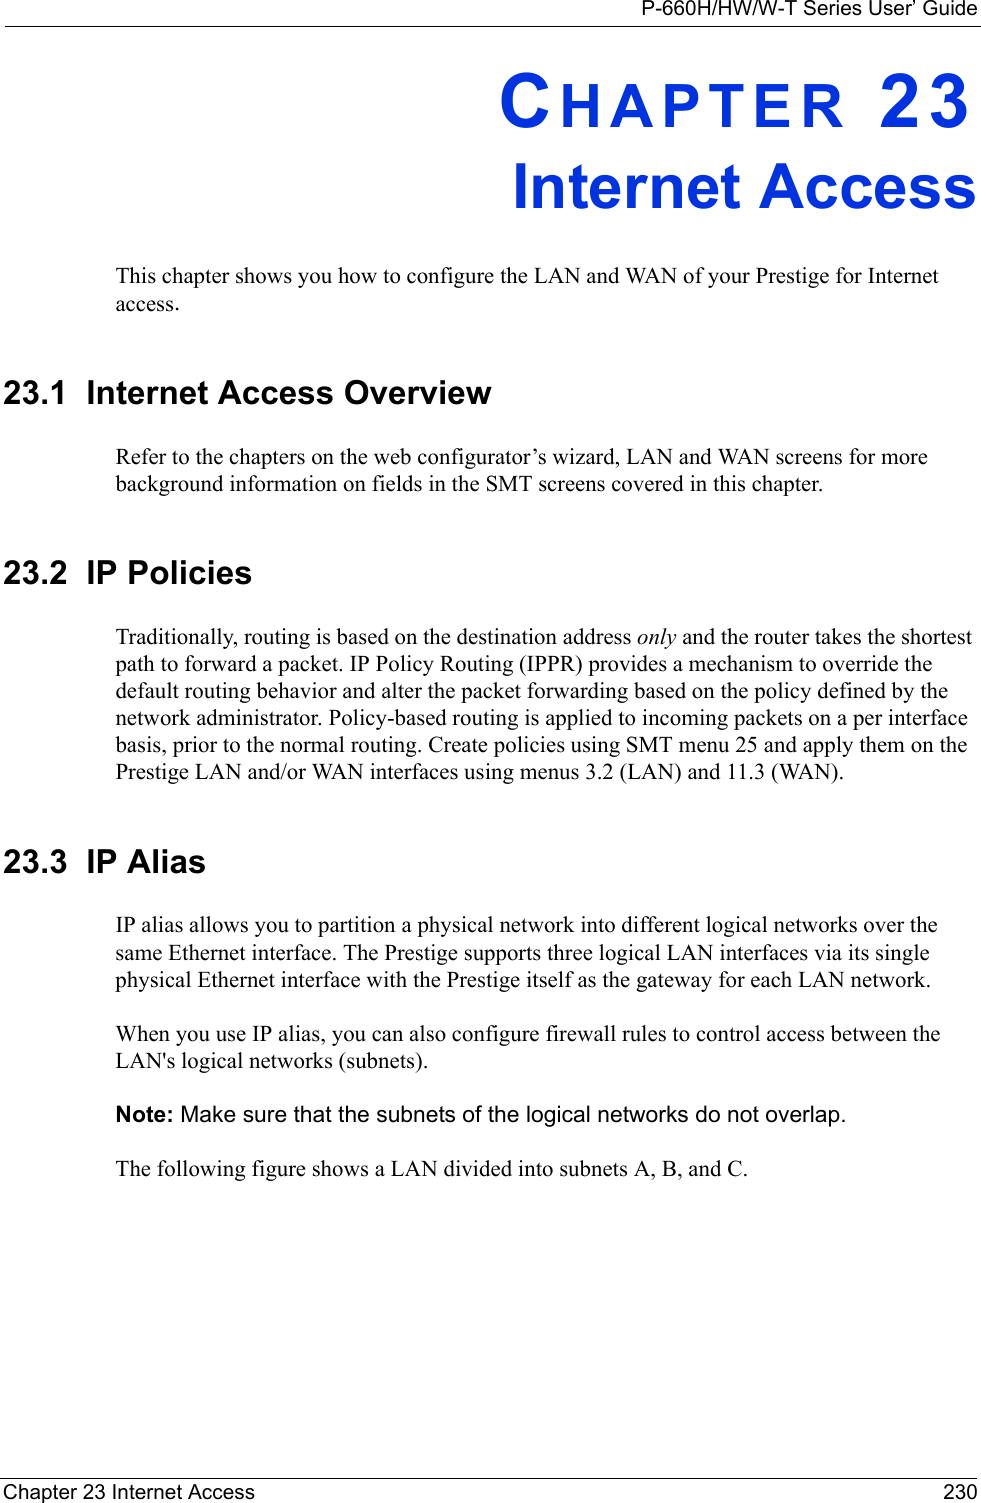 P-660H/HW/W-T Series User’ GuideChapter 23 Internet Access 230CHAPTER 23Internet AccessThis chapter shows you how to configure the LAN and WAN of your Prestige for Internet access.23.1  Internet Access OverviewRefer to the chapters on the web configurator’s wizard, LAN and WAN screens for more background information on fields in the SMT screens covered in this chapter.23.2  IP PoliciesTraditionally, routing is based on the destination address only and the router takes the shortest path to forward a packet. IP Policy Routing (IPPR) provides a mechanism to override the default routing behavior and alter the packet forwarding based on the policy defined by the network administrator. Policy-based routing is applied to incoming packets on a per interface basis, prior to the normal routing. Create policies using SMT menu 25 and apply them on the Prestige LAN and/or WAN interfaces using menus 3.2 (LAN) and 11.3 (WAN).23.3  IP AliasIP alias allows you to partition a physical network into different logical networks over the same Ethernet interface. The Prestige supports three logical LAN interfaces via its single physical Ethernet interface with the Prestige itself as the gateway for each LAN network.When you use IP alias, you can also configure firewall rules to control access between the LAN&apos;s logical networks (subnets).Note: Make sure that the subnets of the logical networks do not overlap.The following figure shows a LAN divided into subnets A, B, and C.